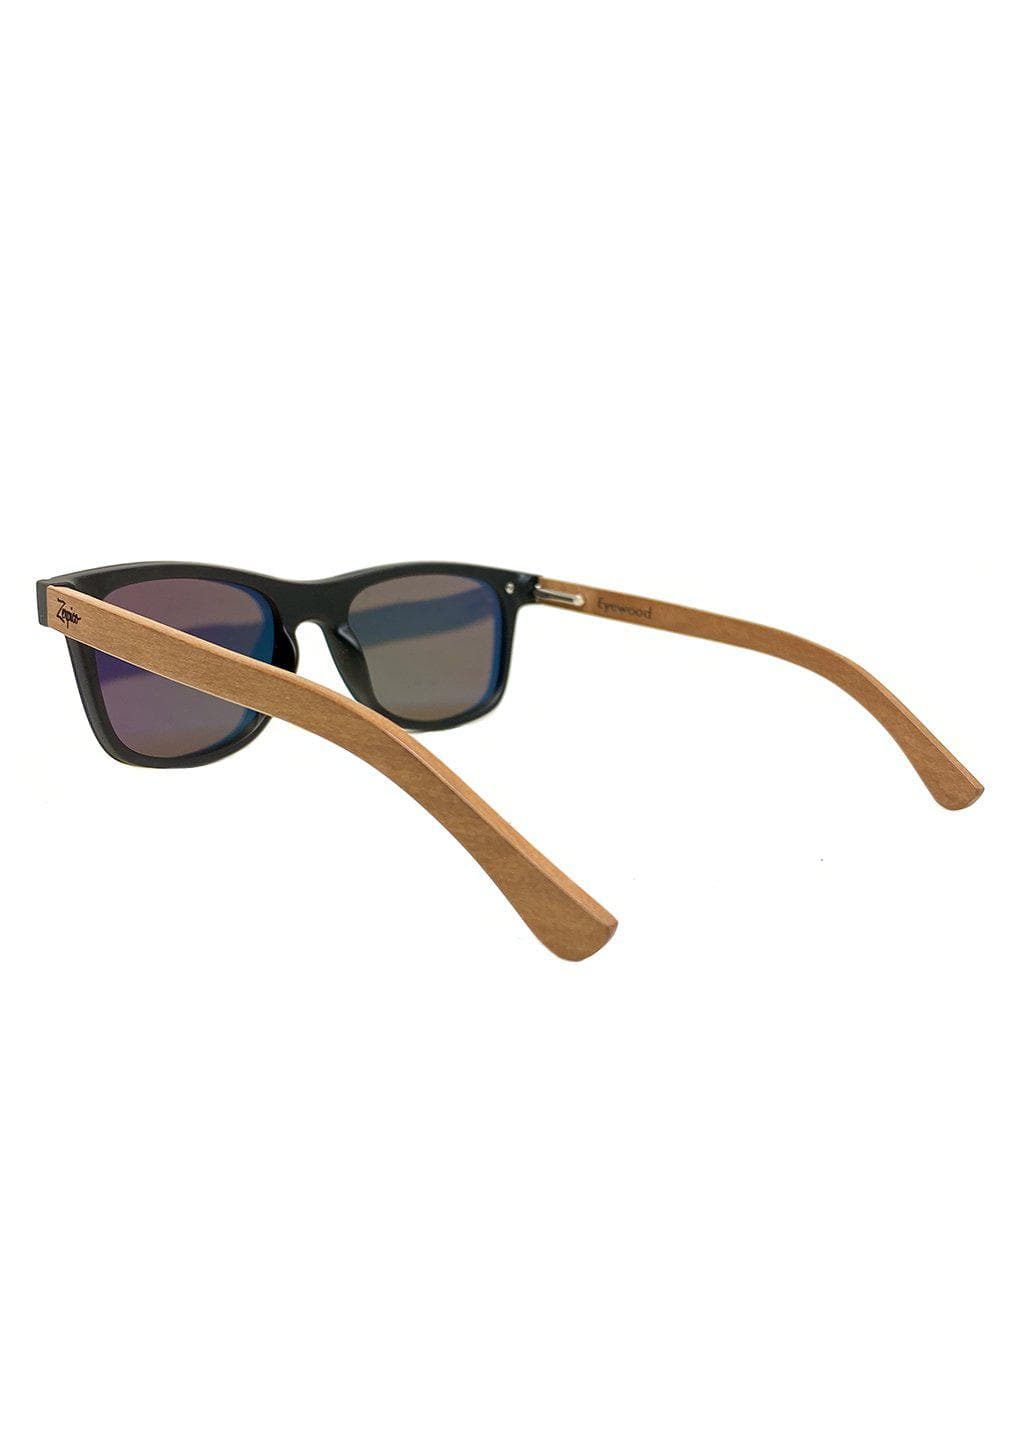 Eyewood tomorrow is our modern cool take on classic models. This is Scorpius with yellow mirror lenses. Nice wooden sunglasses with details from the back.